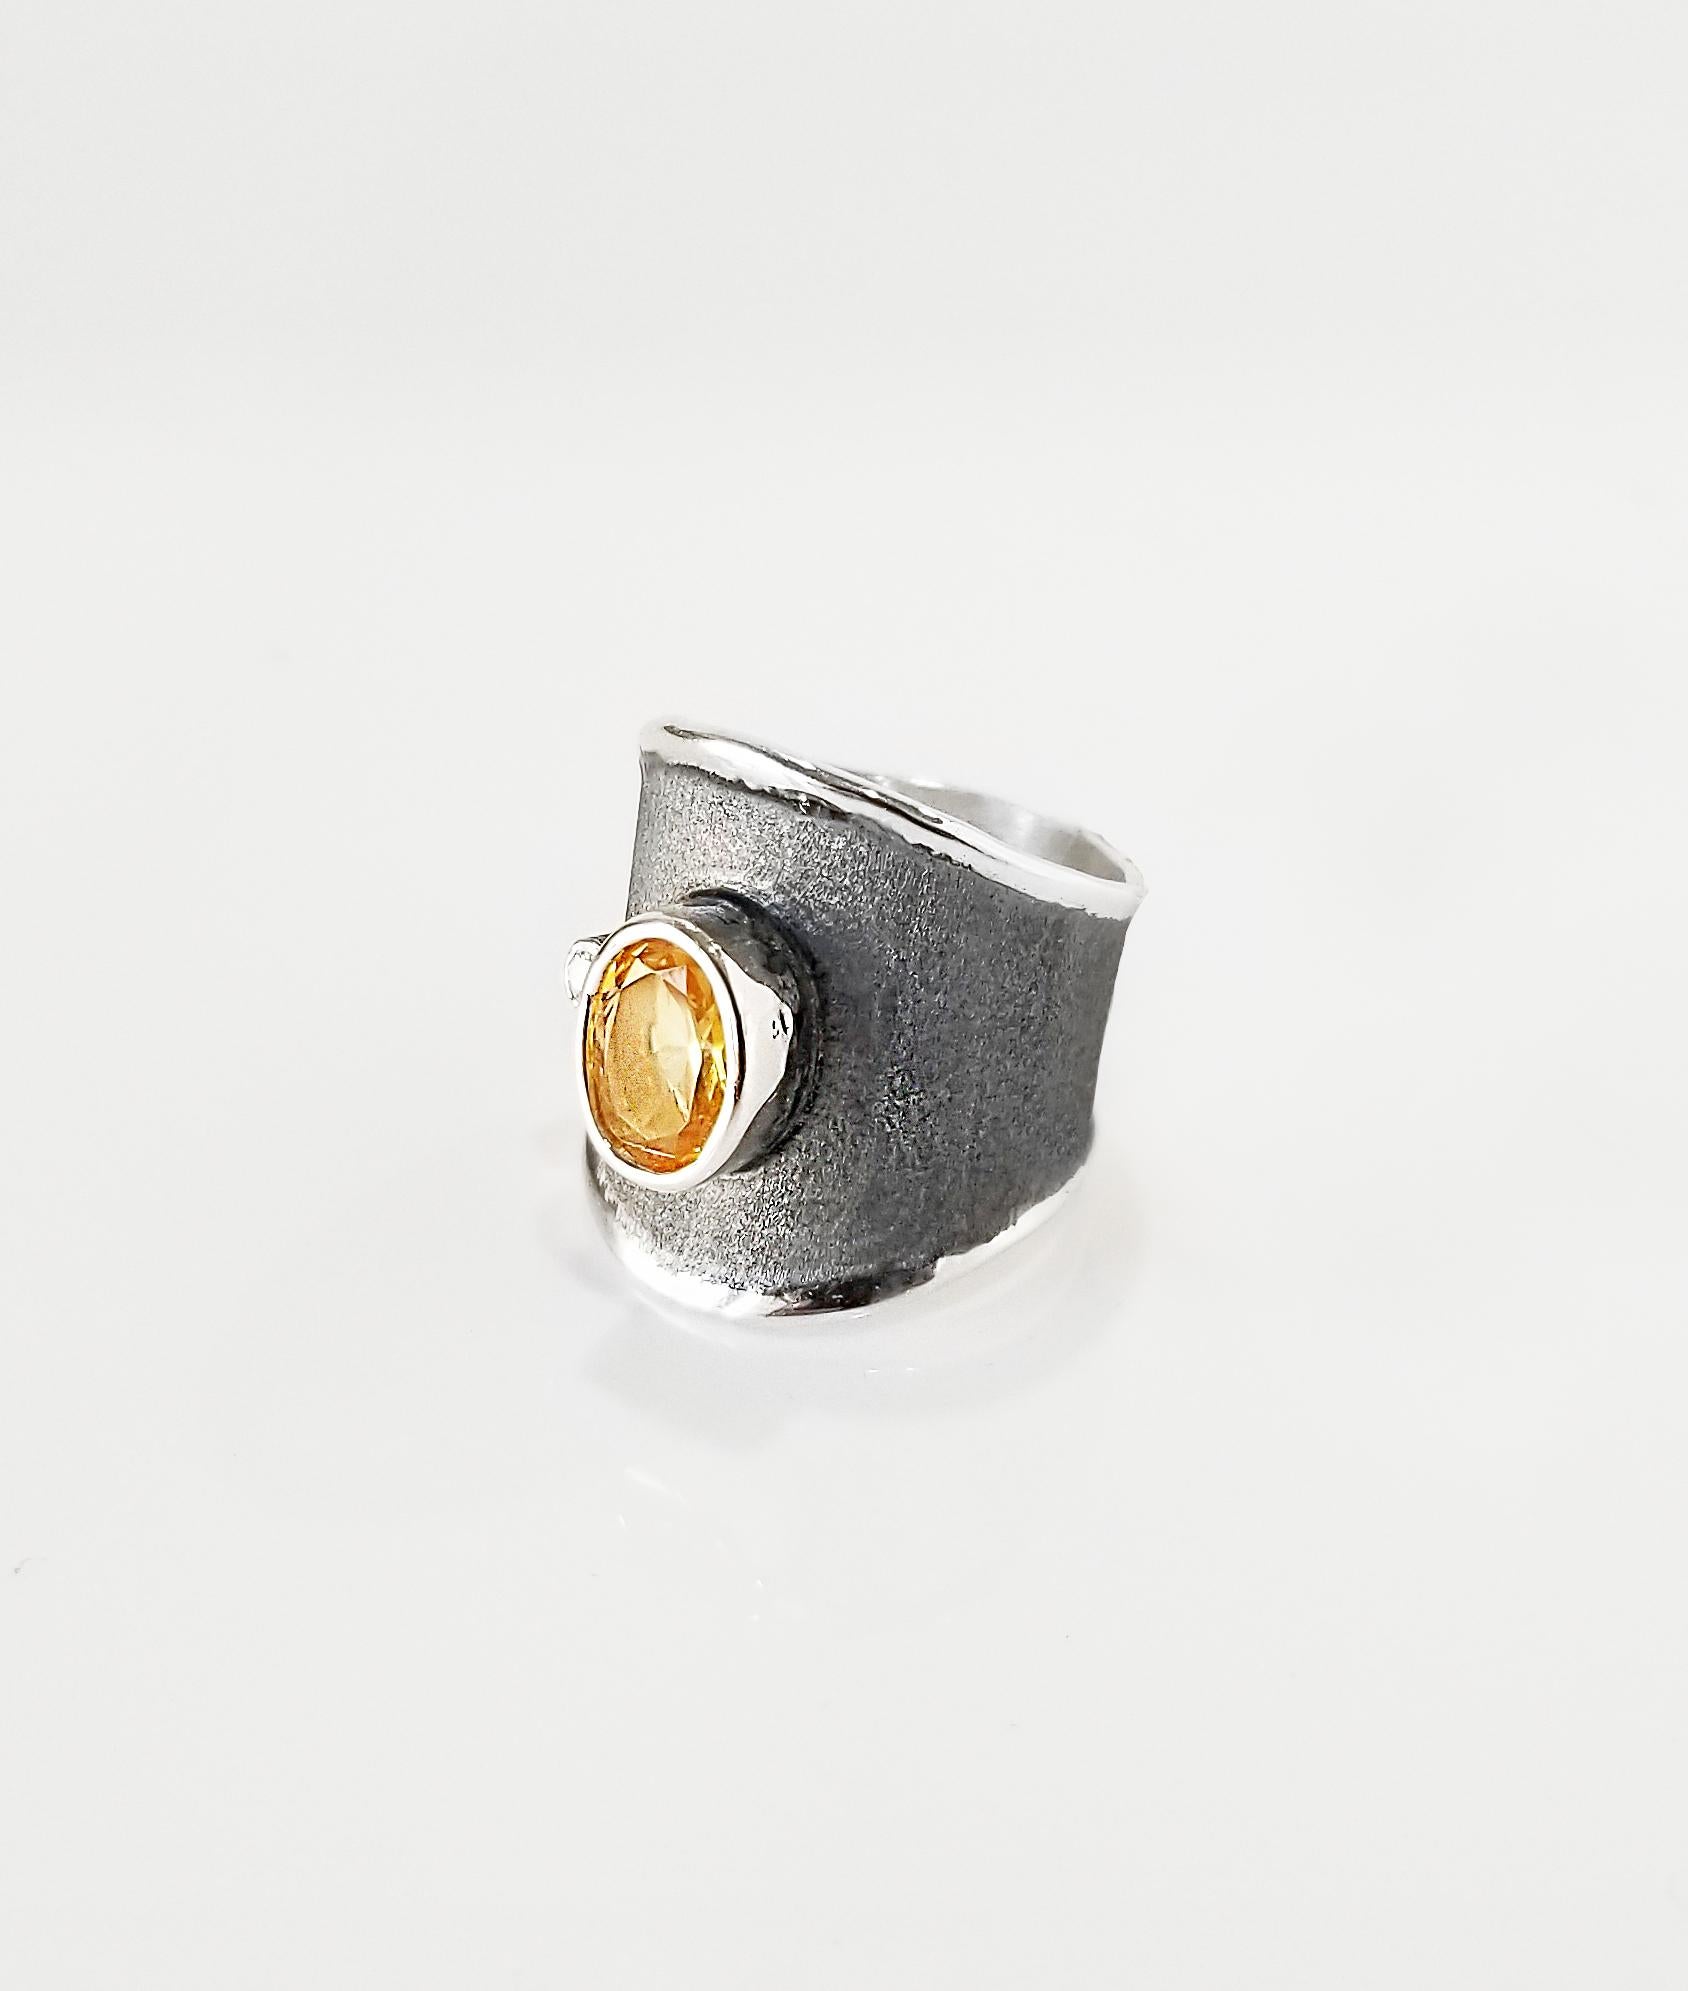 Presenting a handmade ring from Yianni Creations crafted in Greece for Hephestos Collection. This artisan ring is made from fine silver 950 purity and plated with palladium to resist the elements. The ring features 1.40 Carat citrine and 0.03 Carat